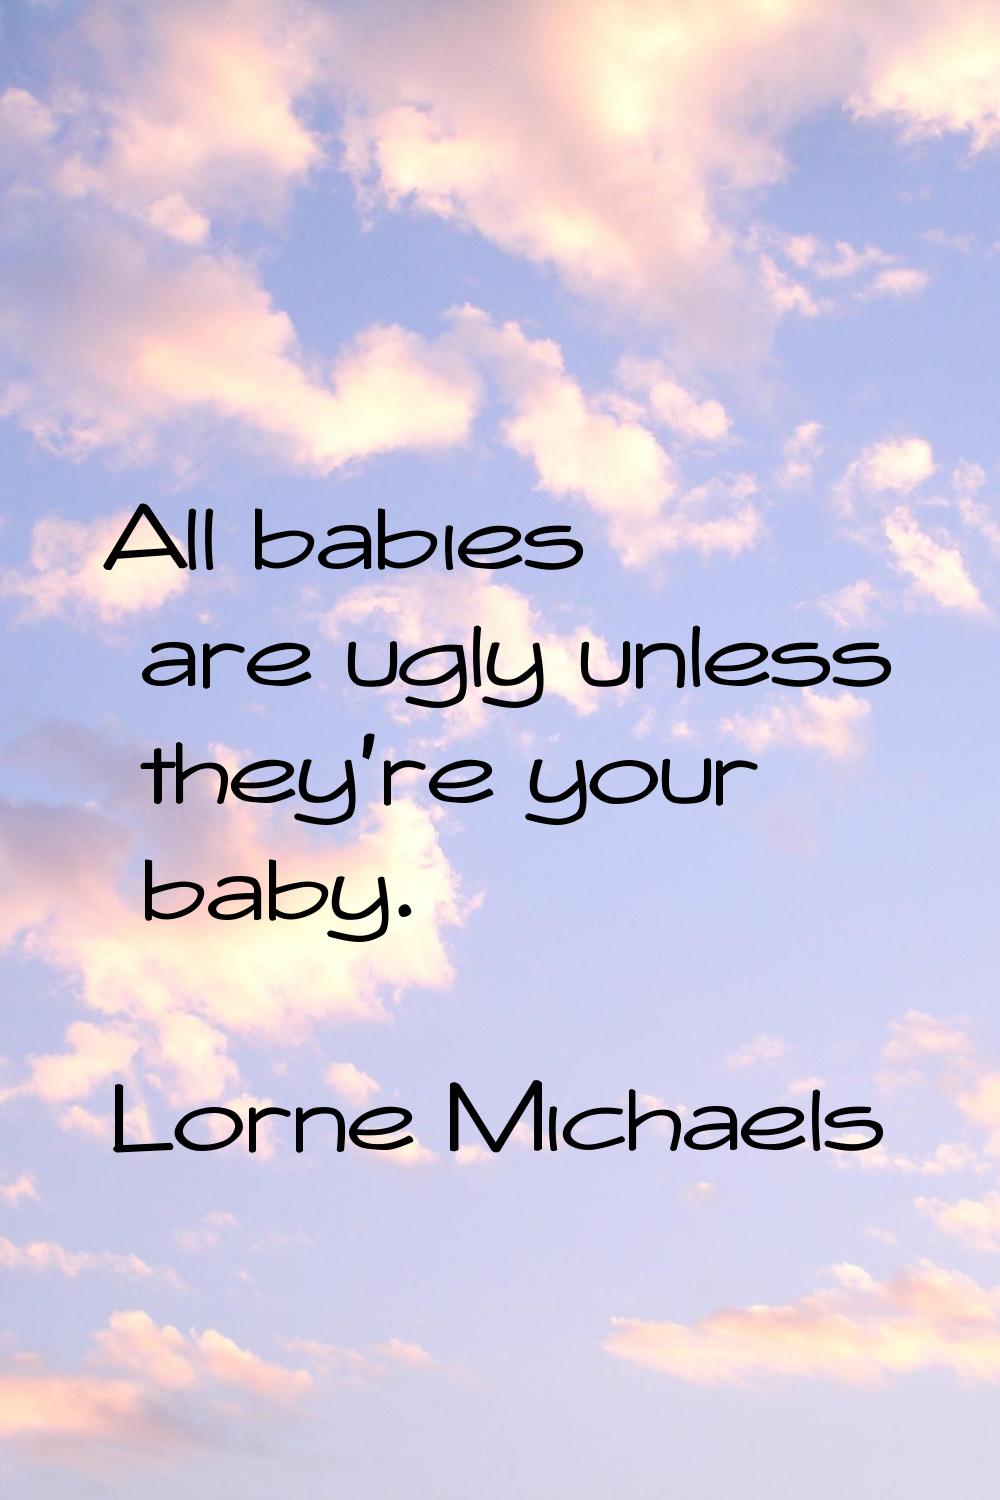 All babies are ugly unless they're your baby.